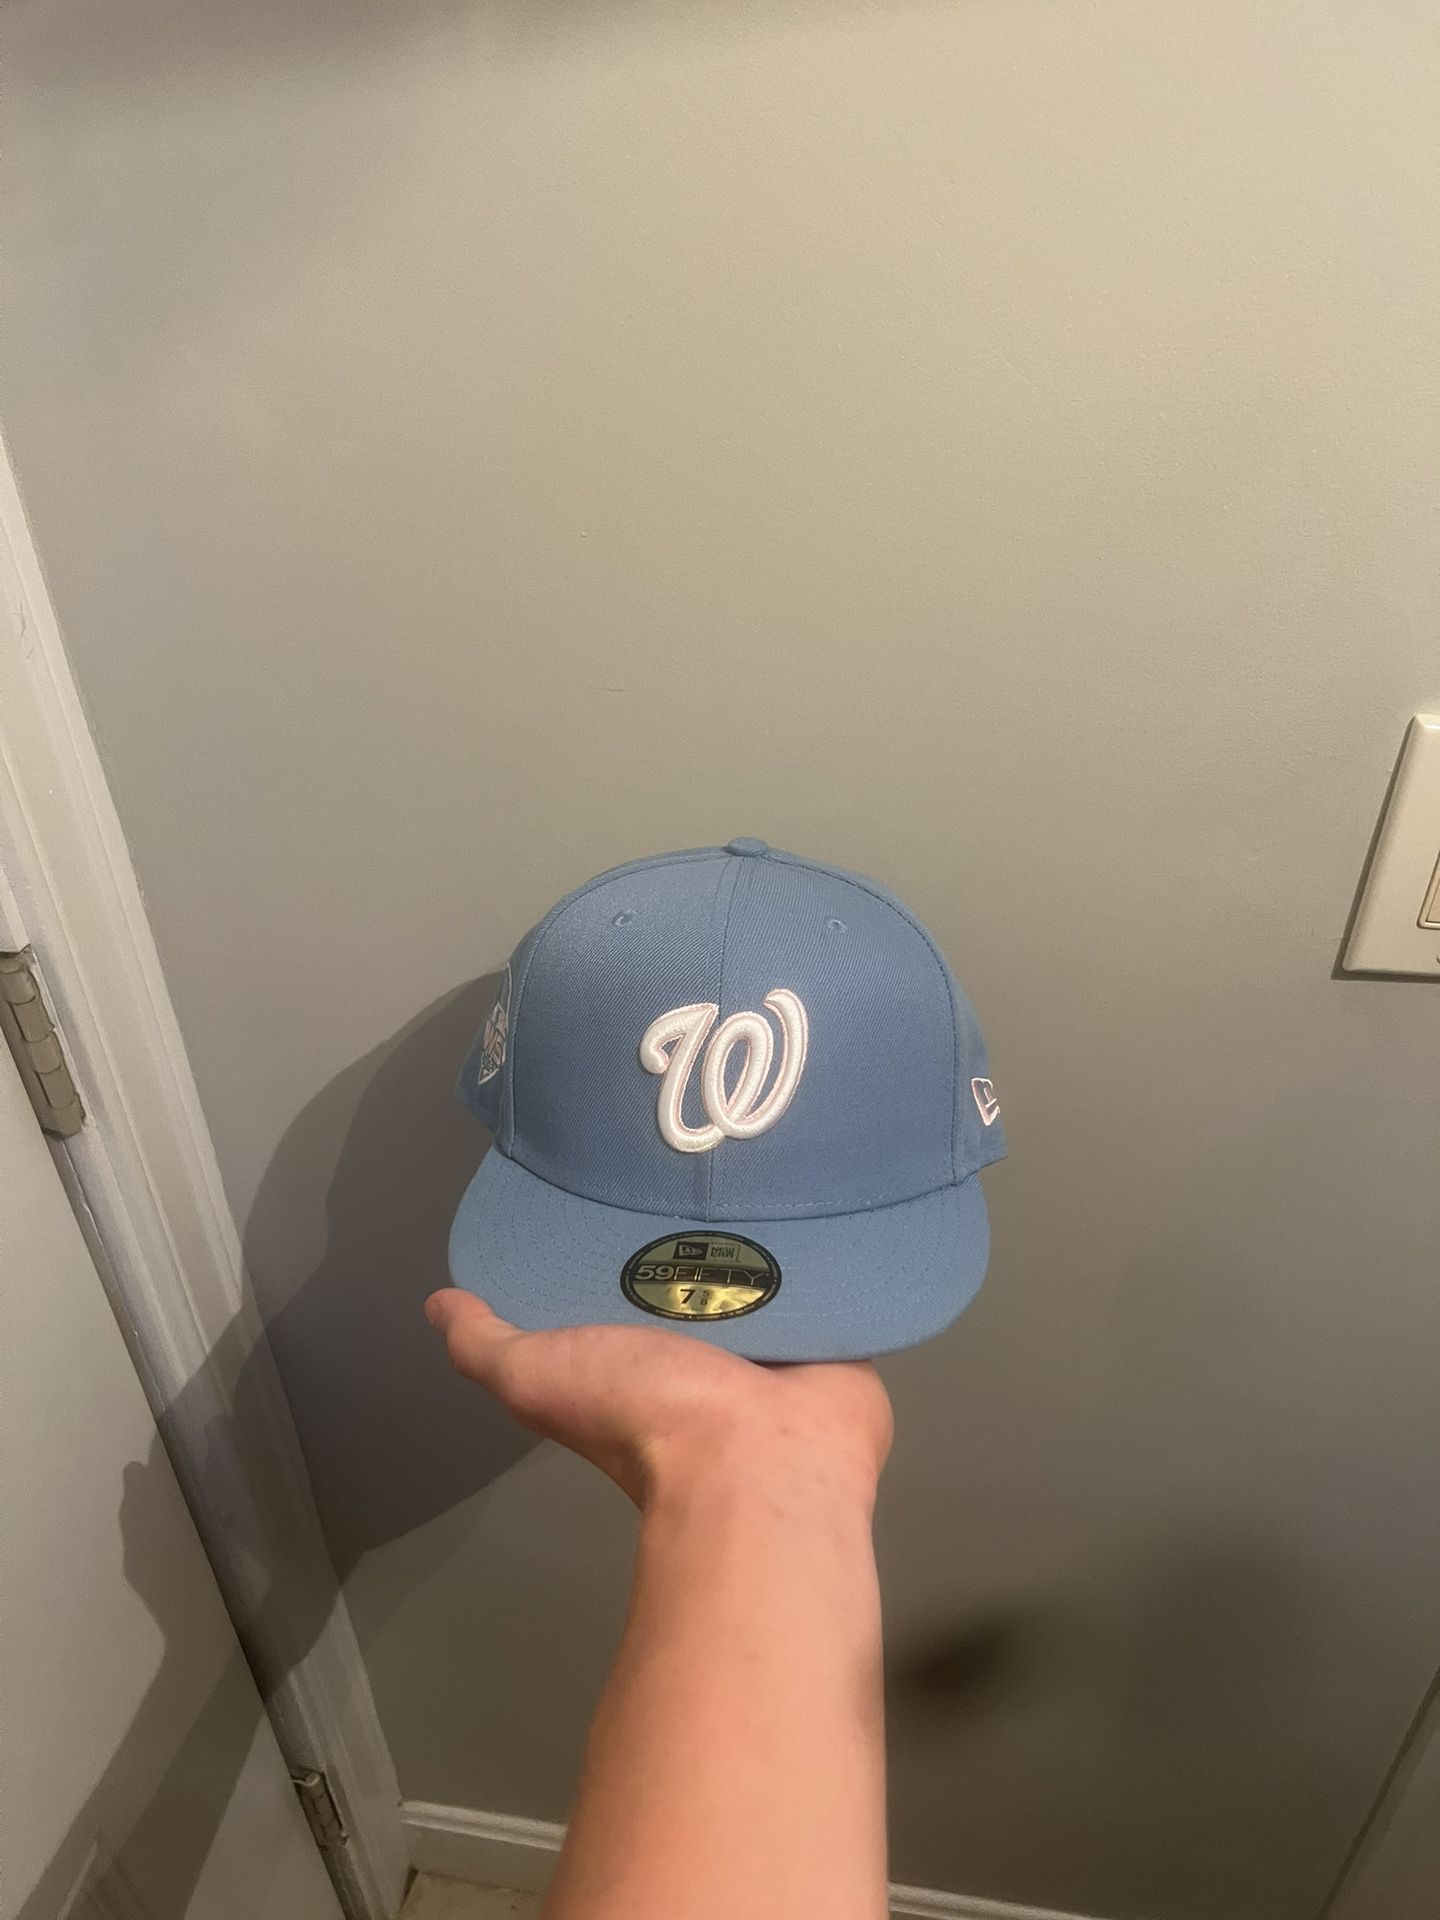 New Era Washington Nationals Fitted Hat Size 7 5/8 for Sale in Worcester,  MA - OfferUp